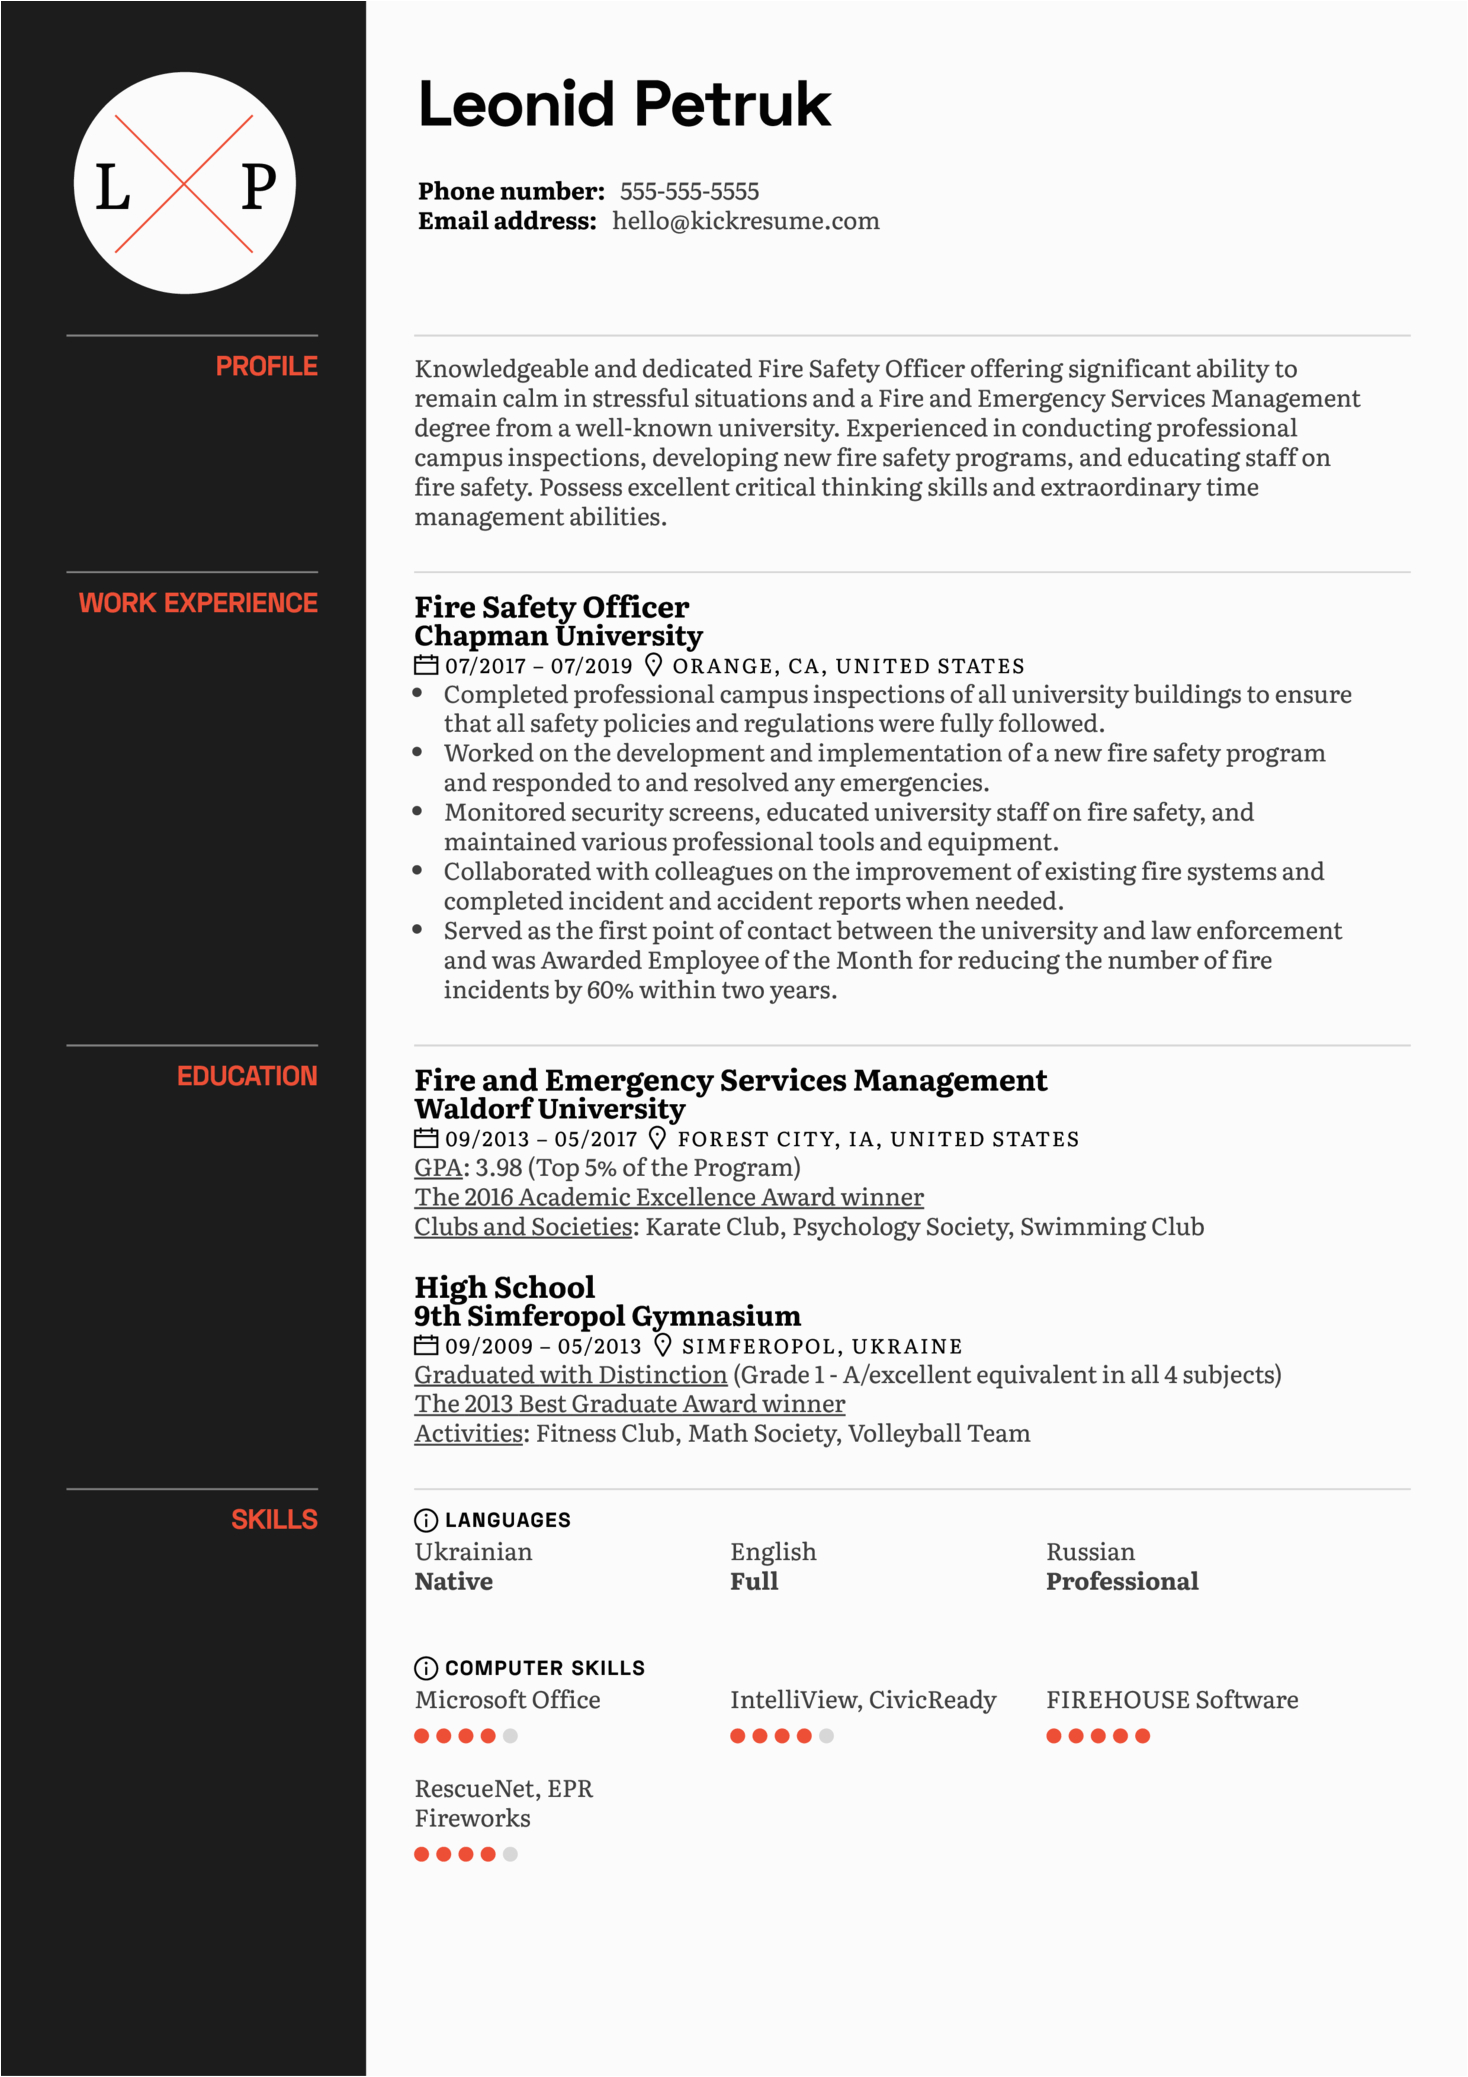 Sample Resume for Fire and Safety Officer Fresher Fire Safety Ficer Resume Sample